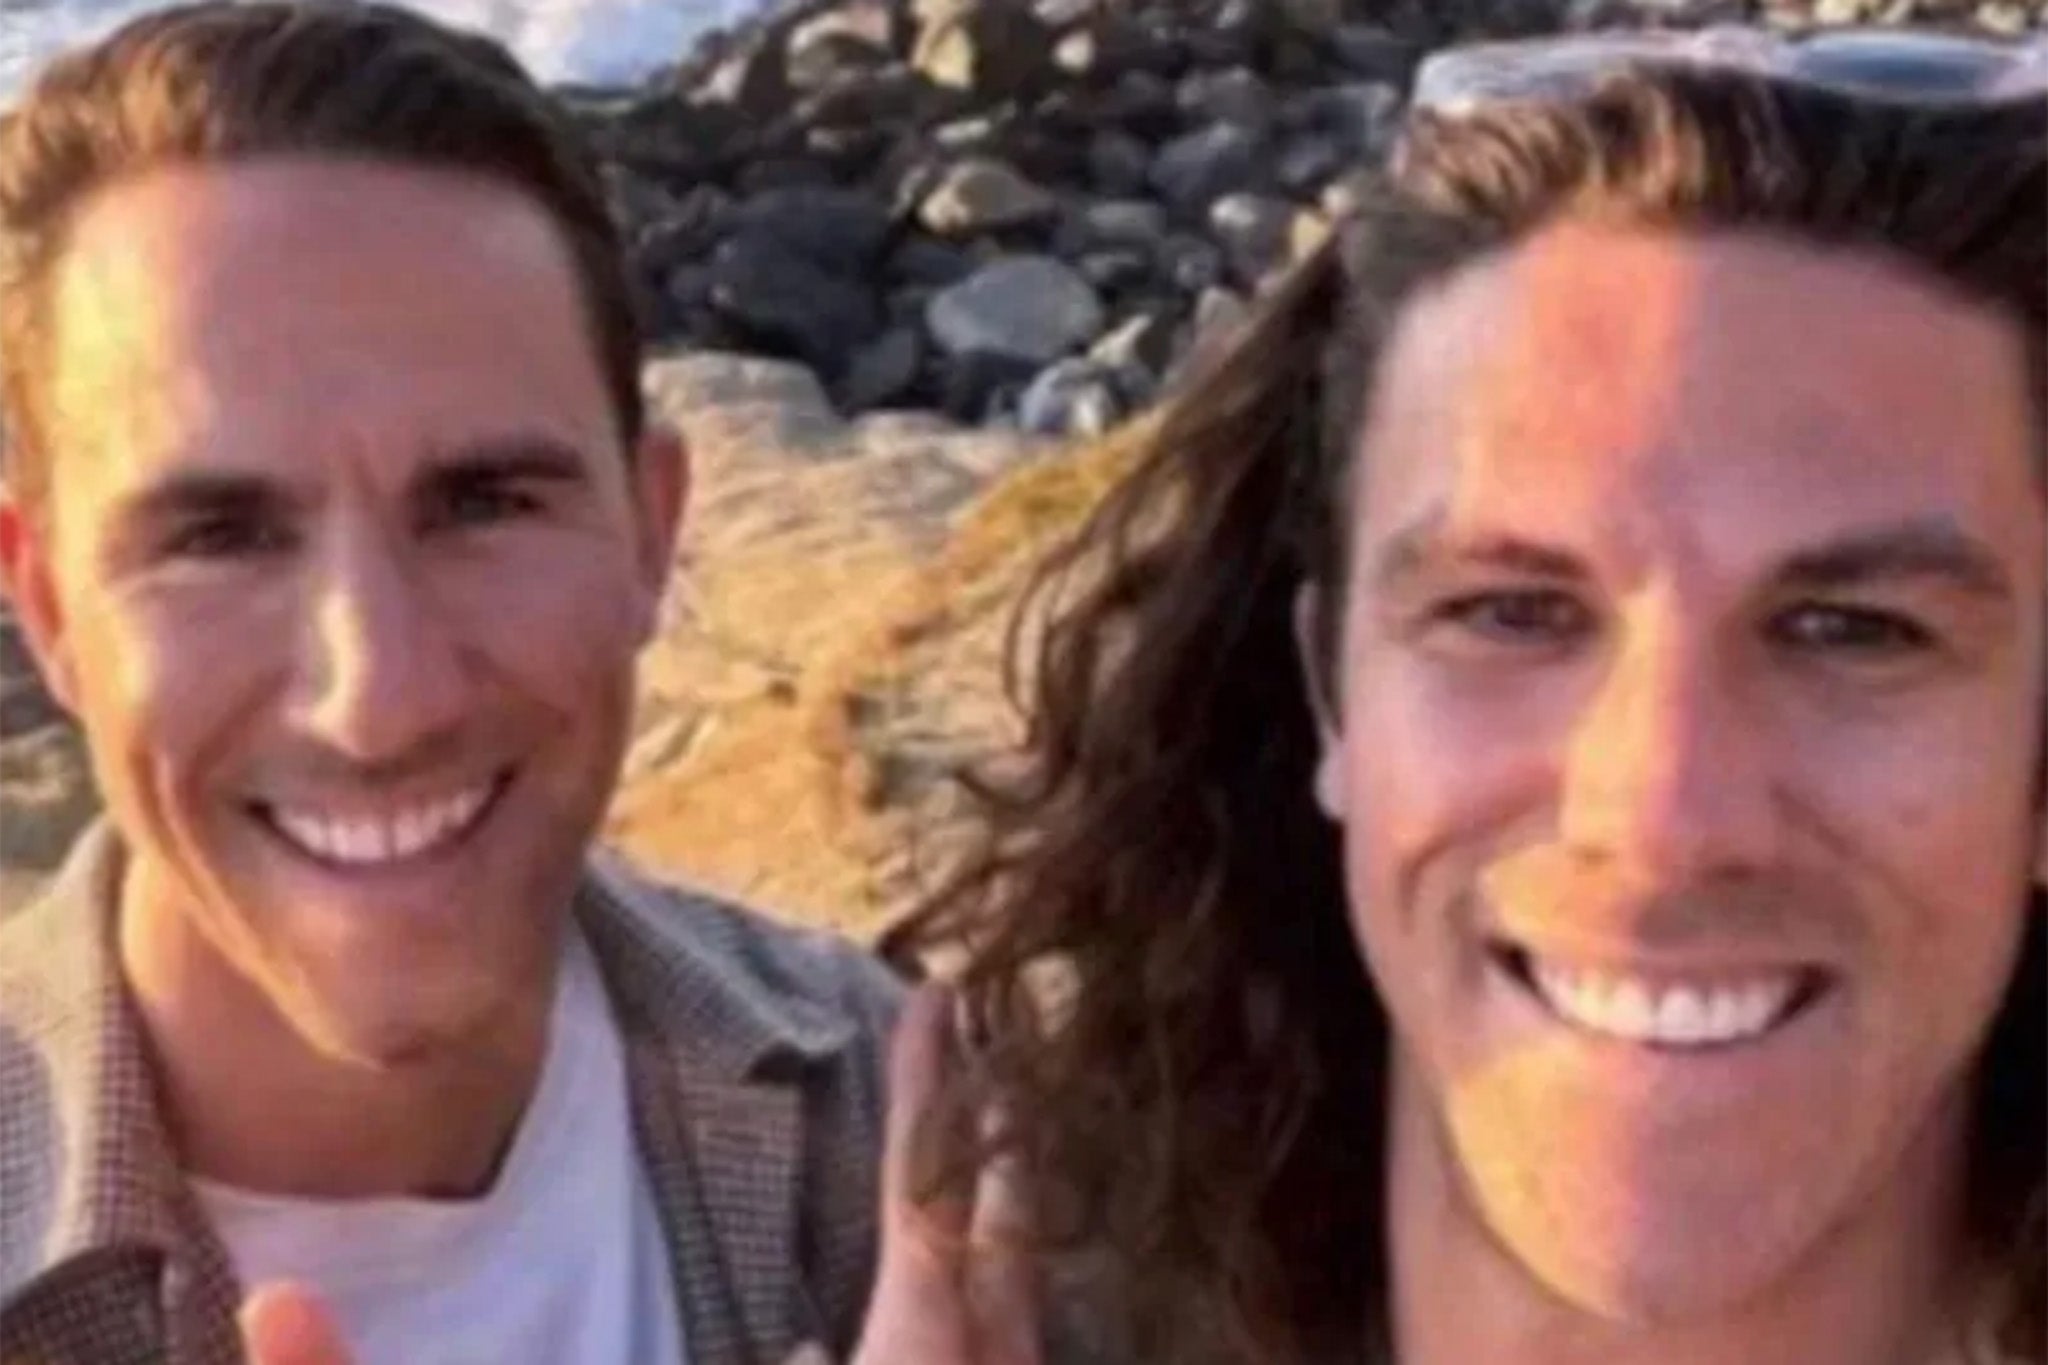 Australian brothers Jake and Callum Robinson, along with San Diego friend, Jack Carter Rhoad, were killed while on a surfing trip in Mexico